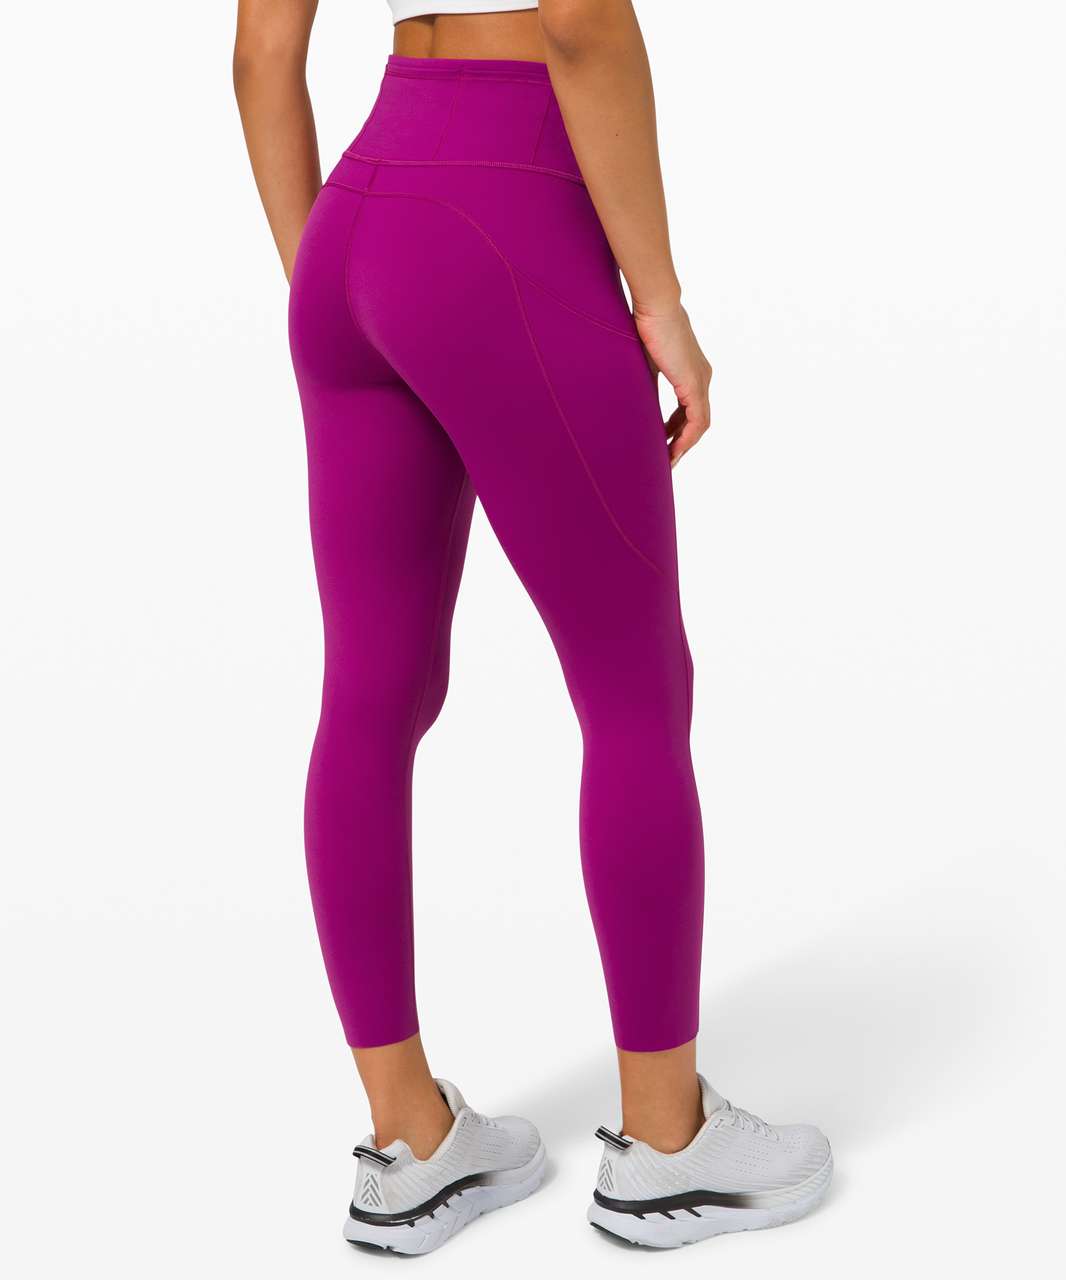 Cropped Colorblocked Leggings: Lululemon Throwback Inspire High-Rise Crop, Lululemon's Throwback Collection Is a Nod to the Brand's Early Bestsellers